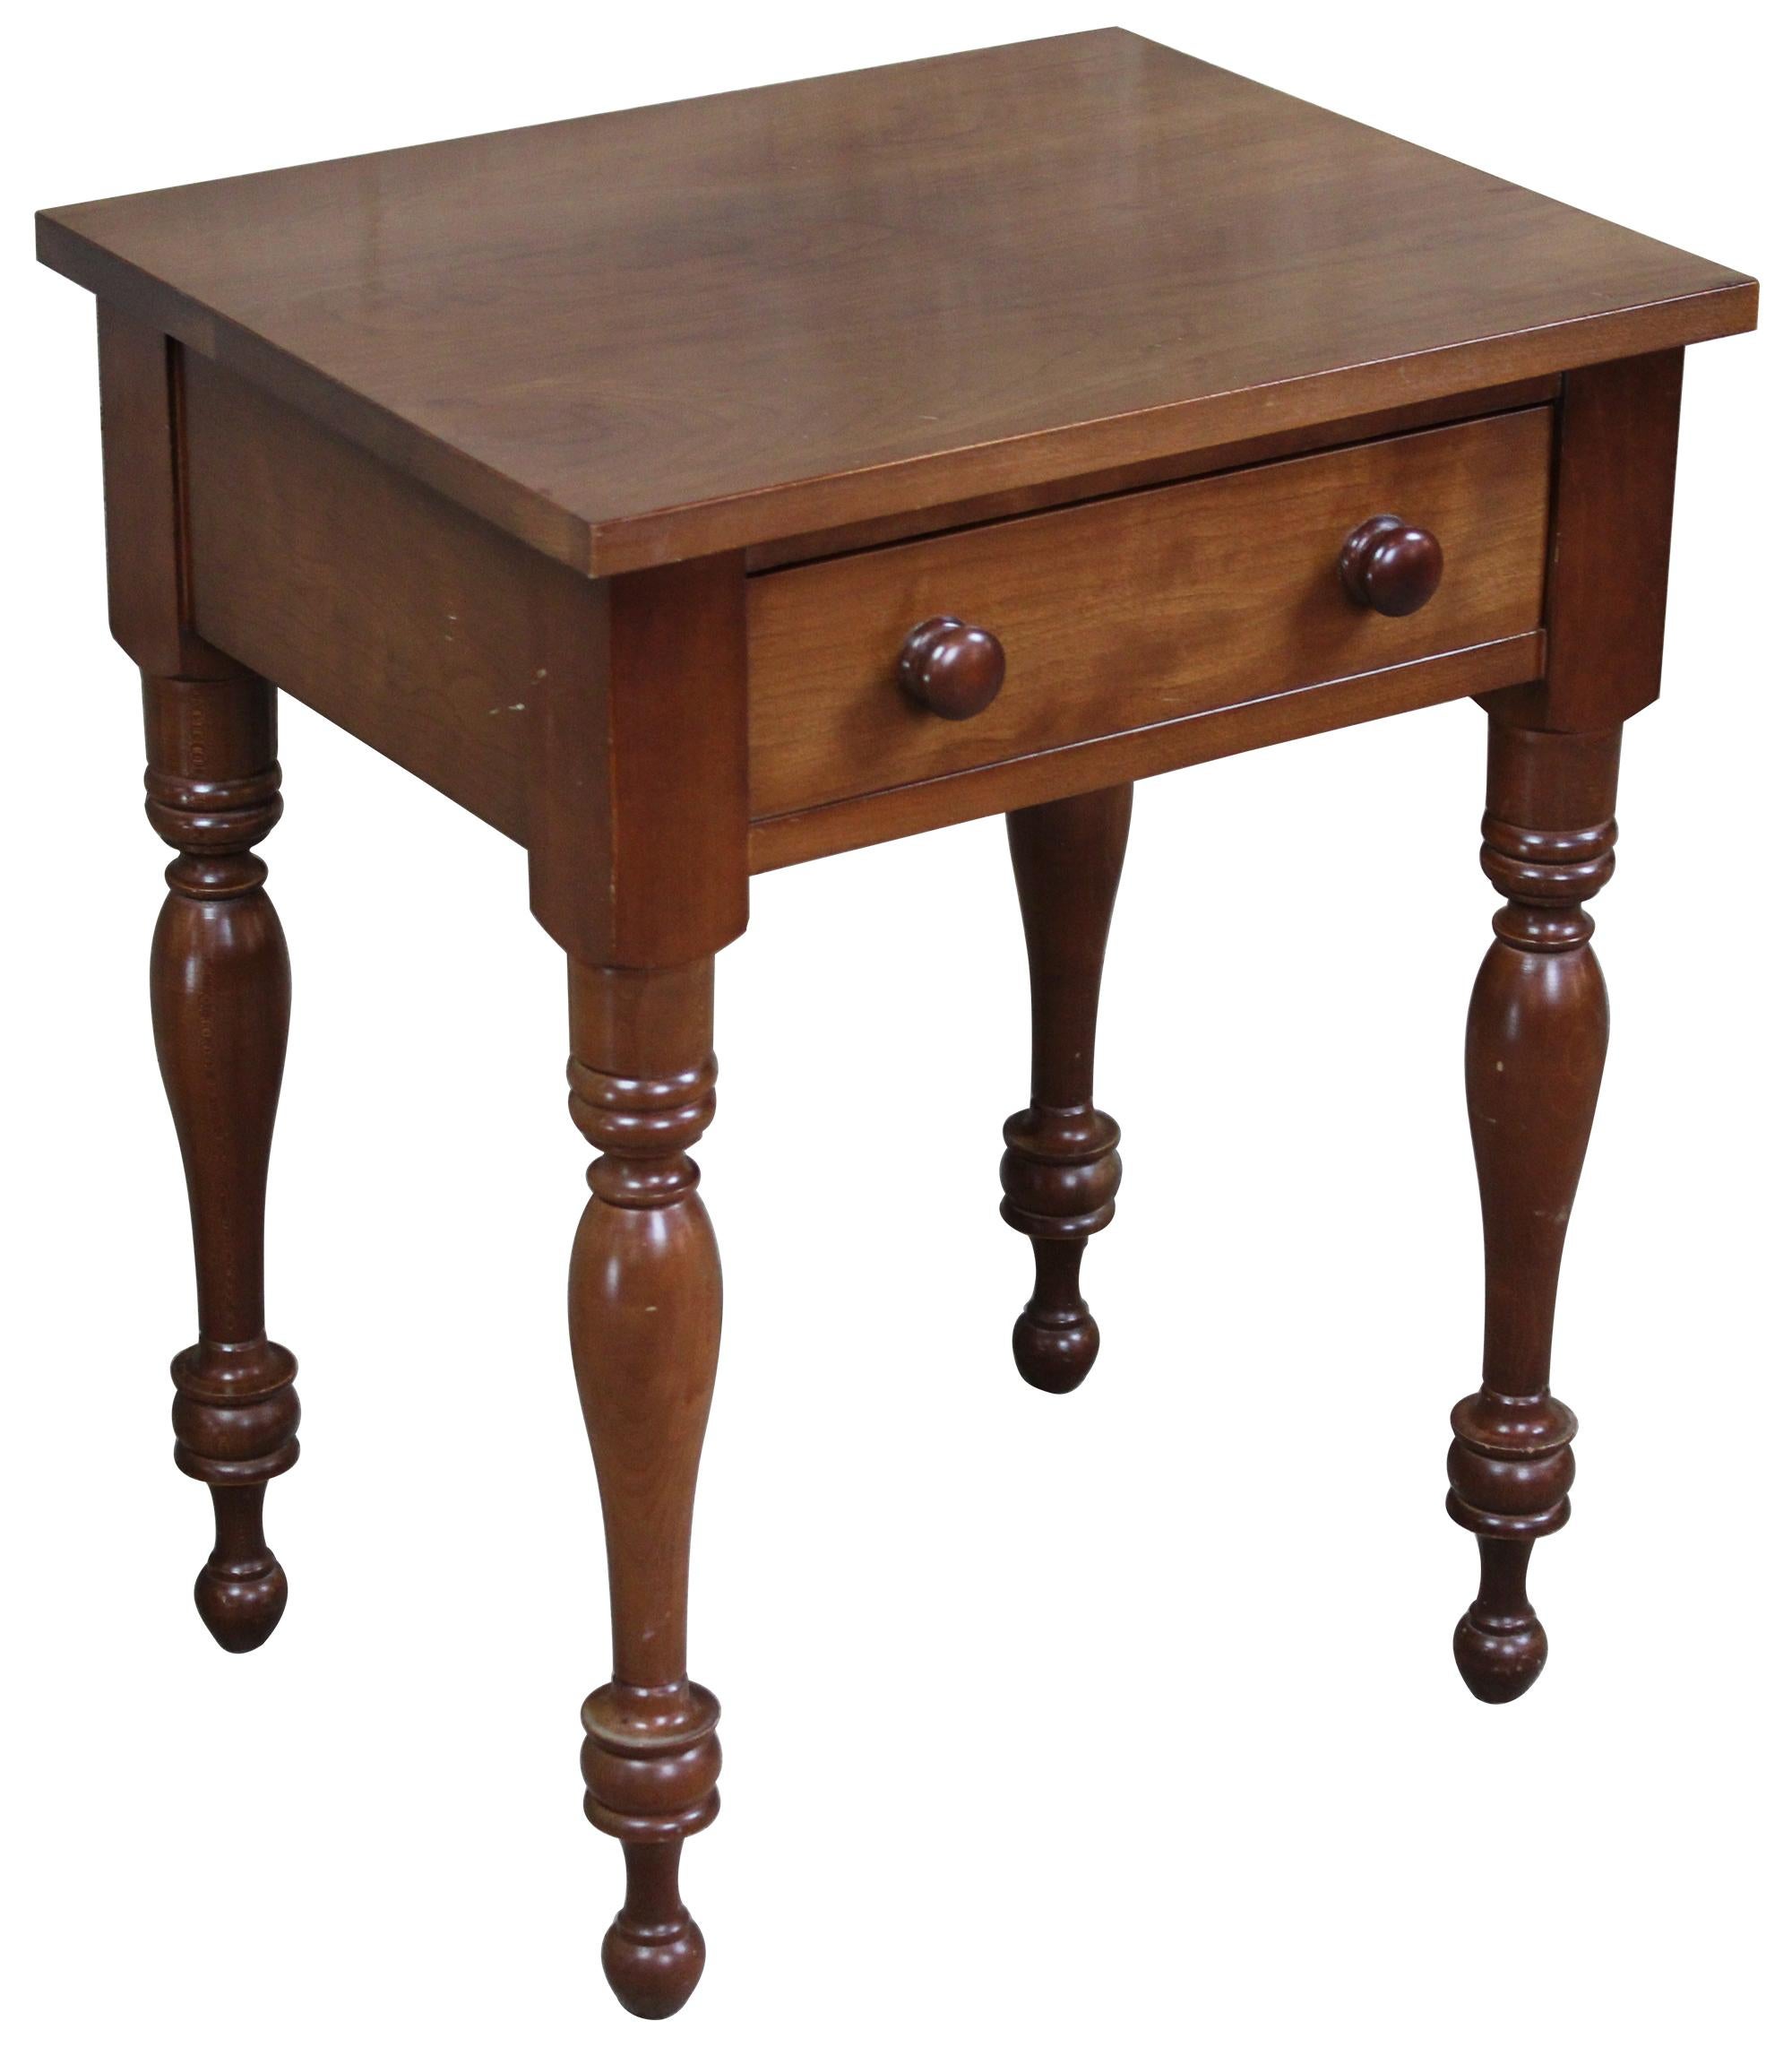 Vintage Cassady Furniture Co solid cherry side table. An early American reproduction featuring one dovetailed upper drawer. Cassady Furniture is out of bowling green Kentucky, circa 1980s. Measure: 27